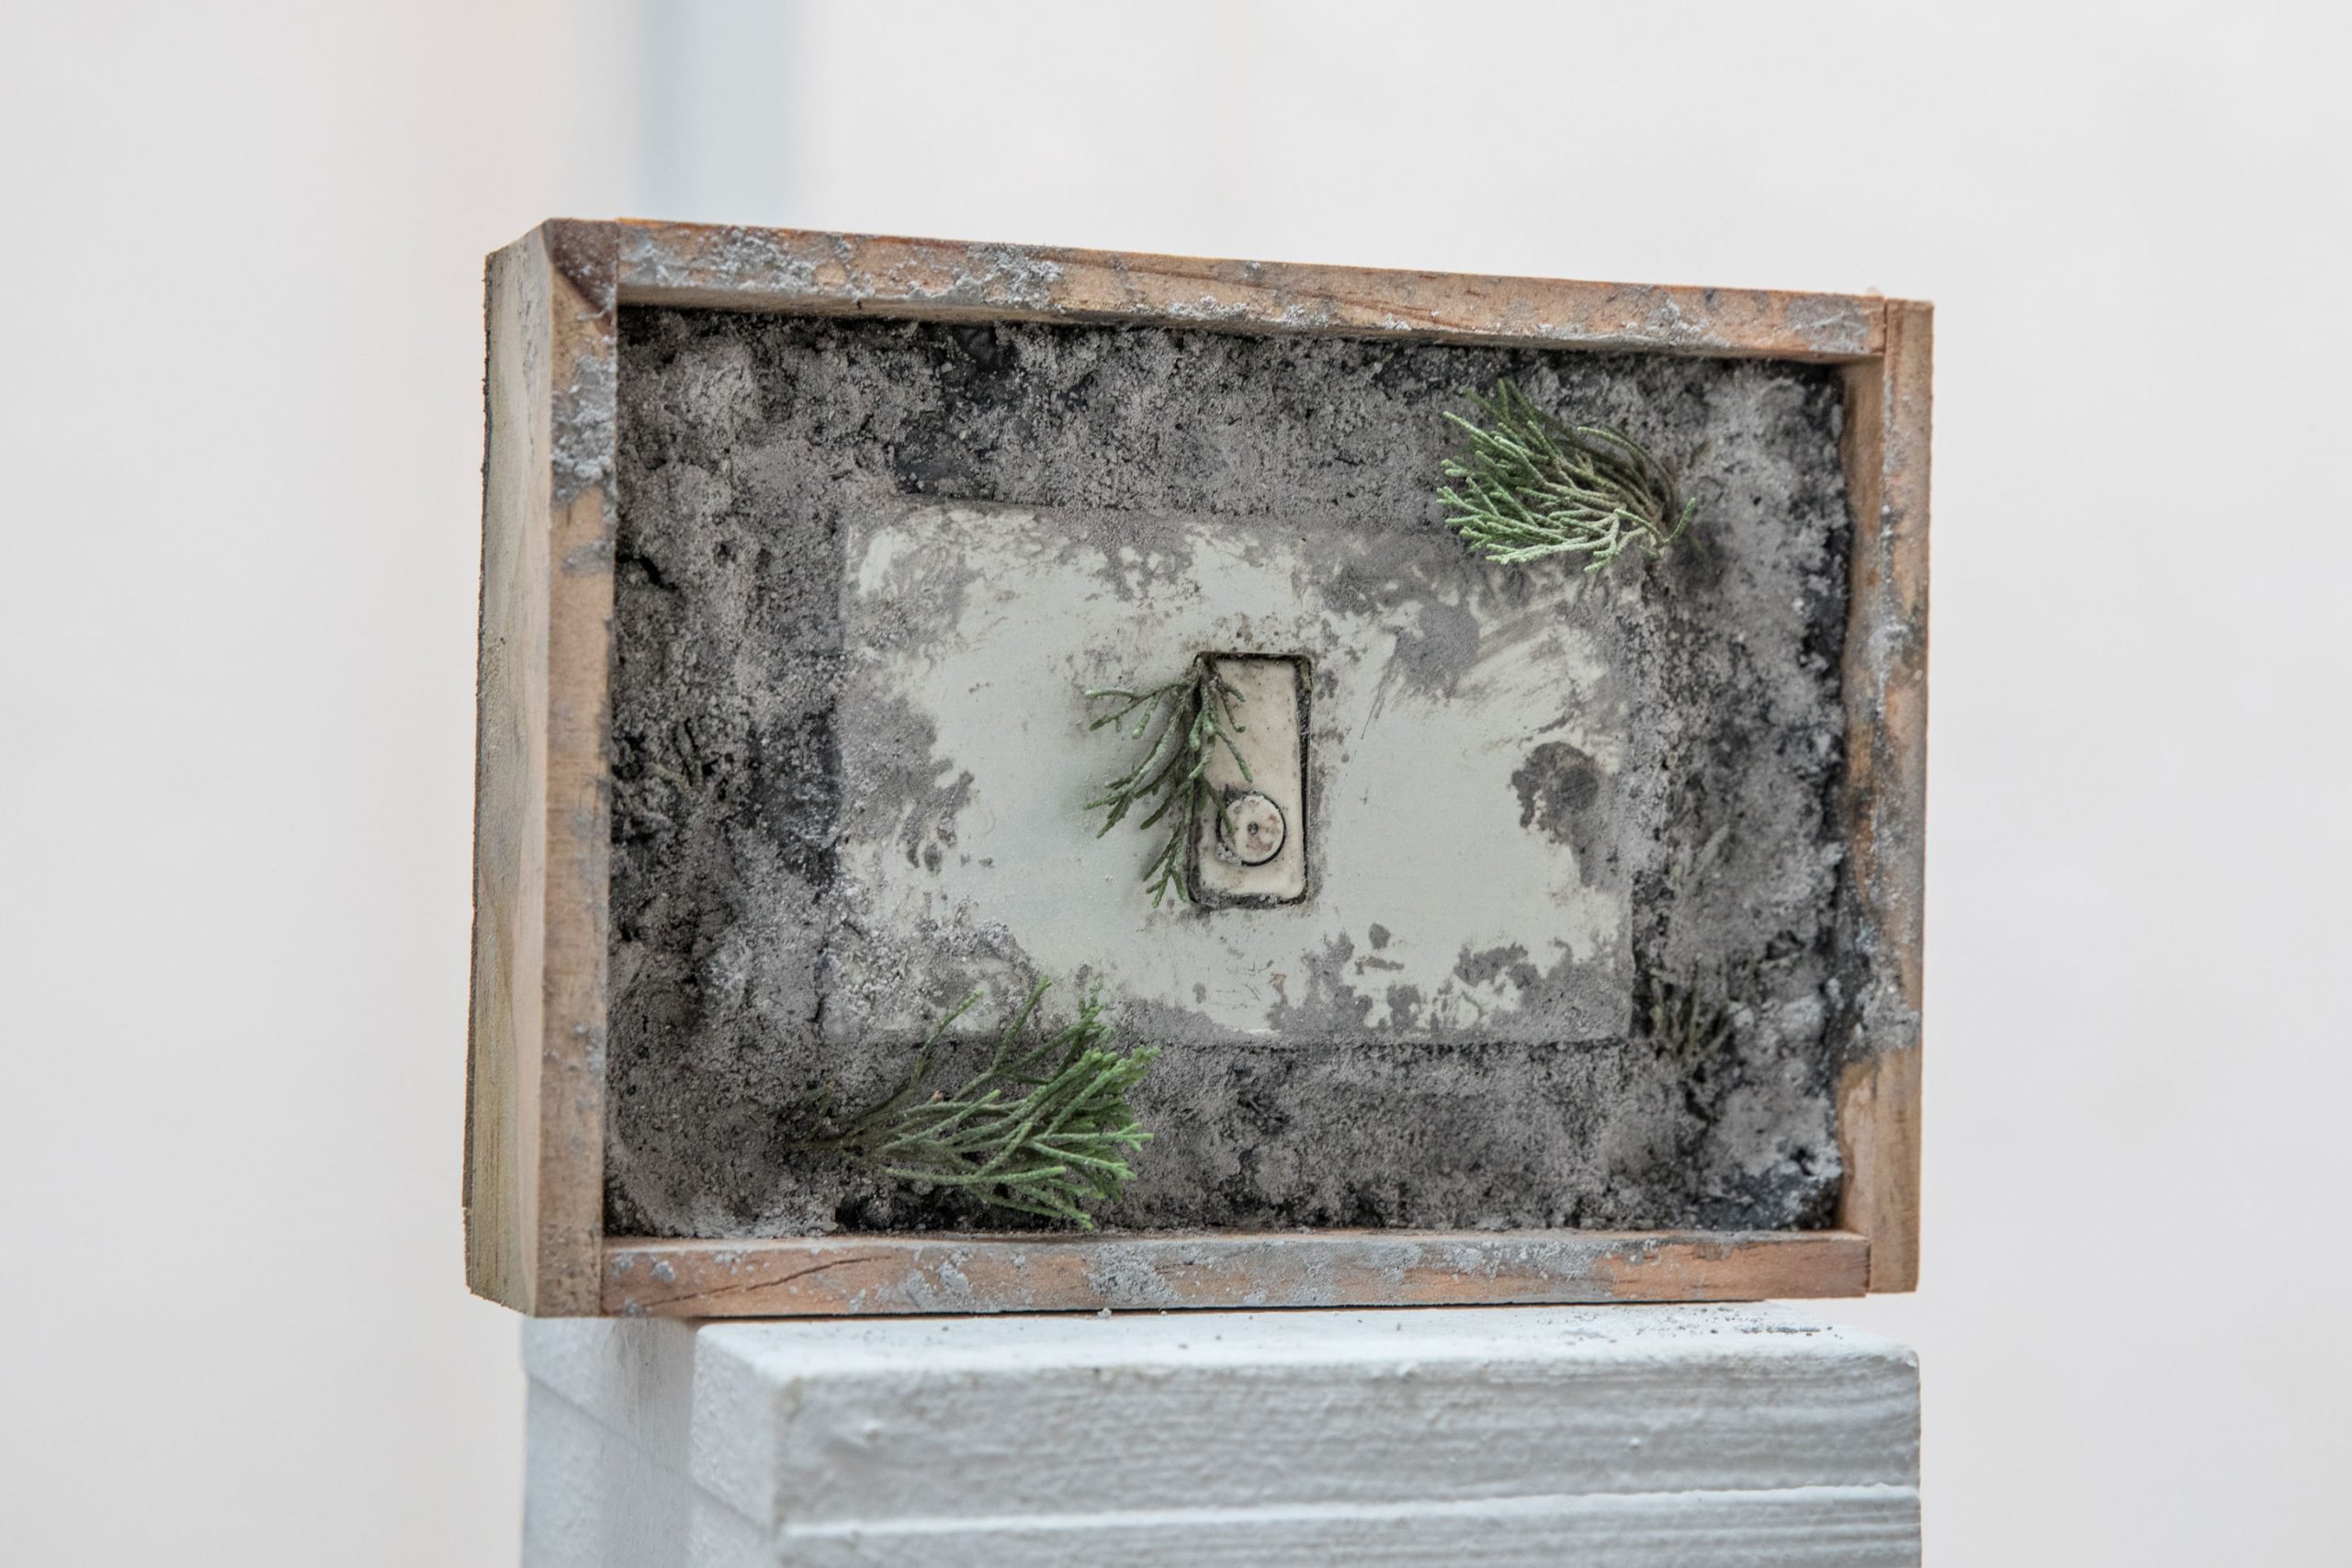 Power Switch, 2018, Ash, power switch, cypress tree leaves from St Elias hill, archivable white glue, and acrylic binder, acrylic varnish on wood, 13.8 x 19.4 x 4.5 cm. Photo by Vitor Schietti